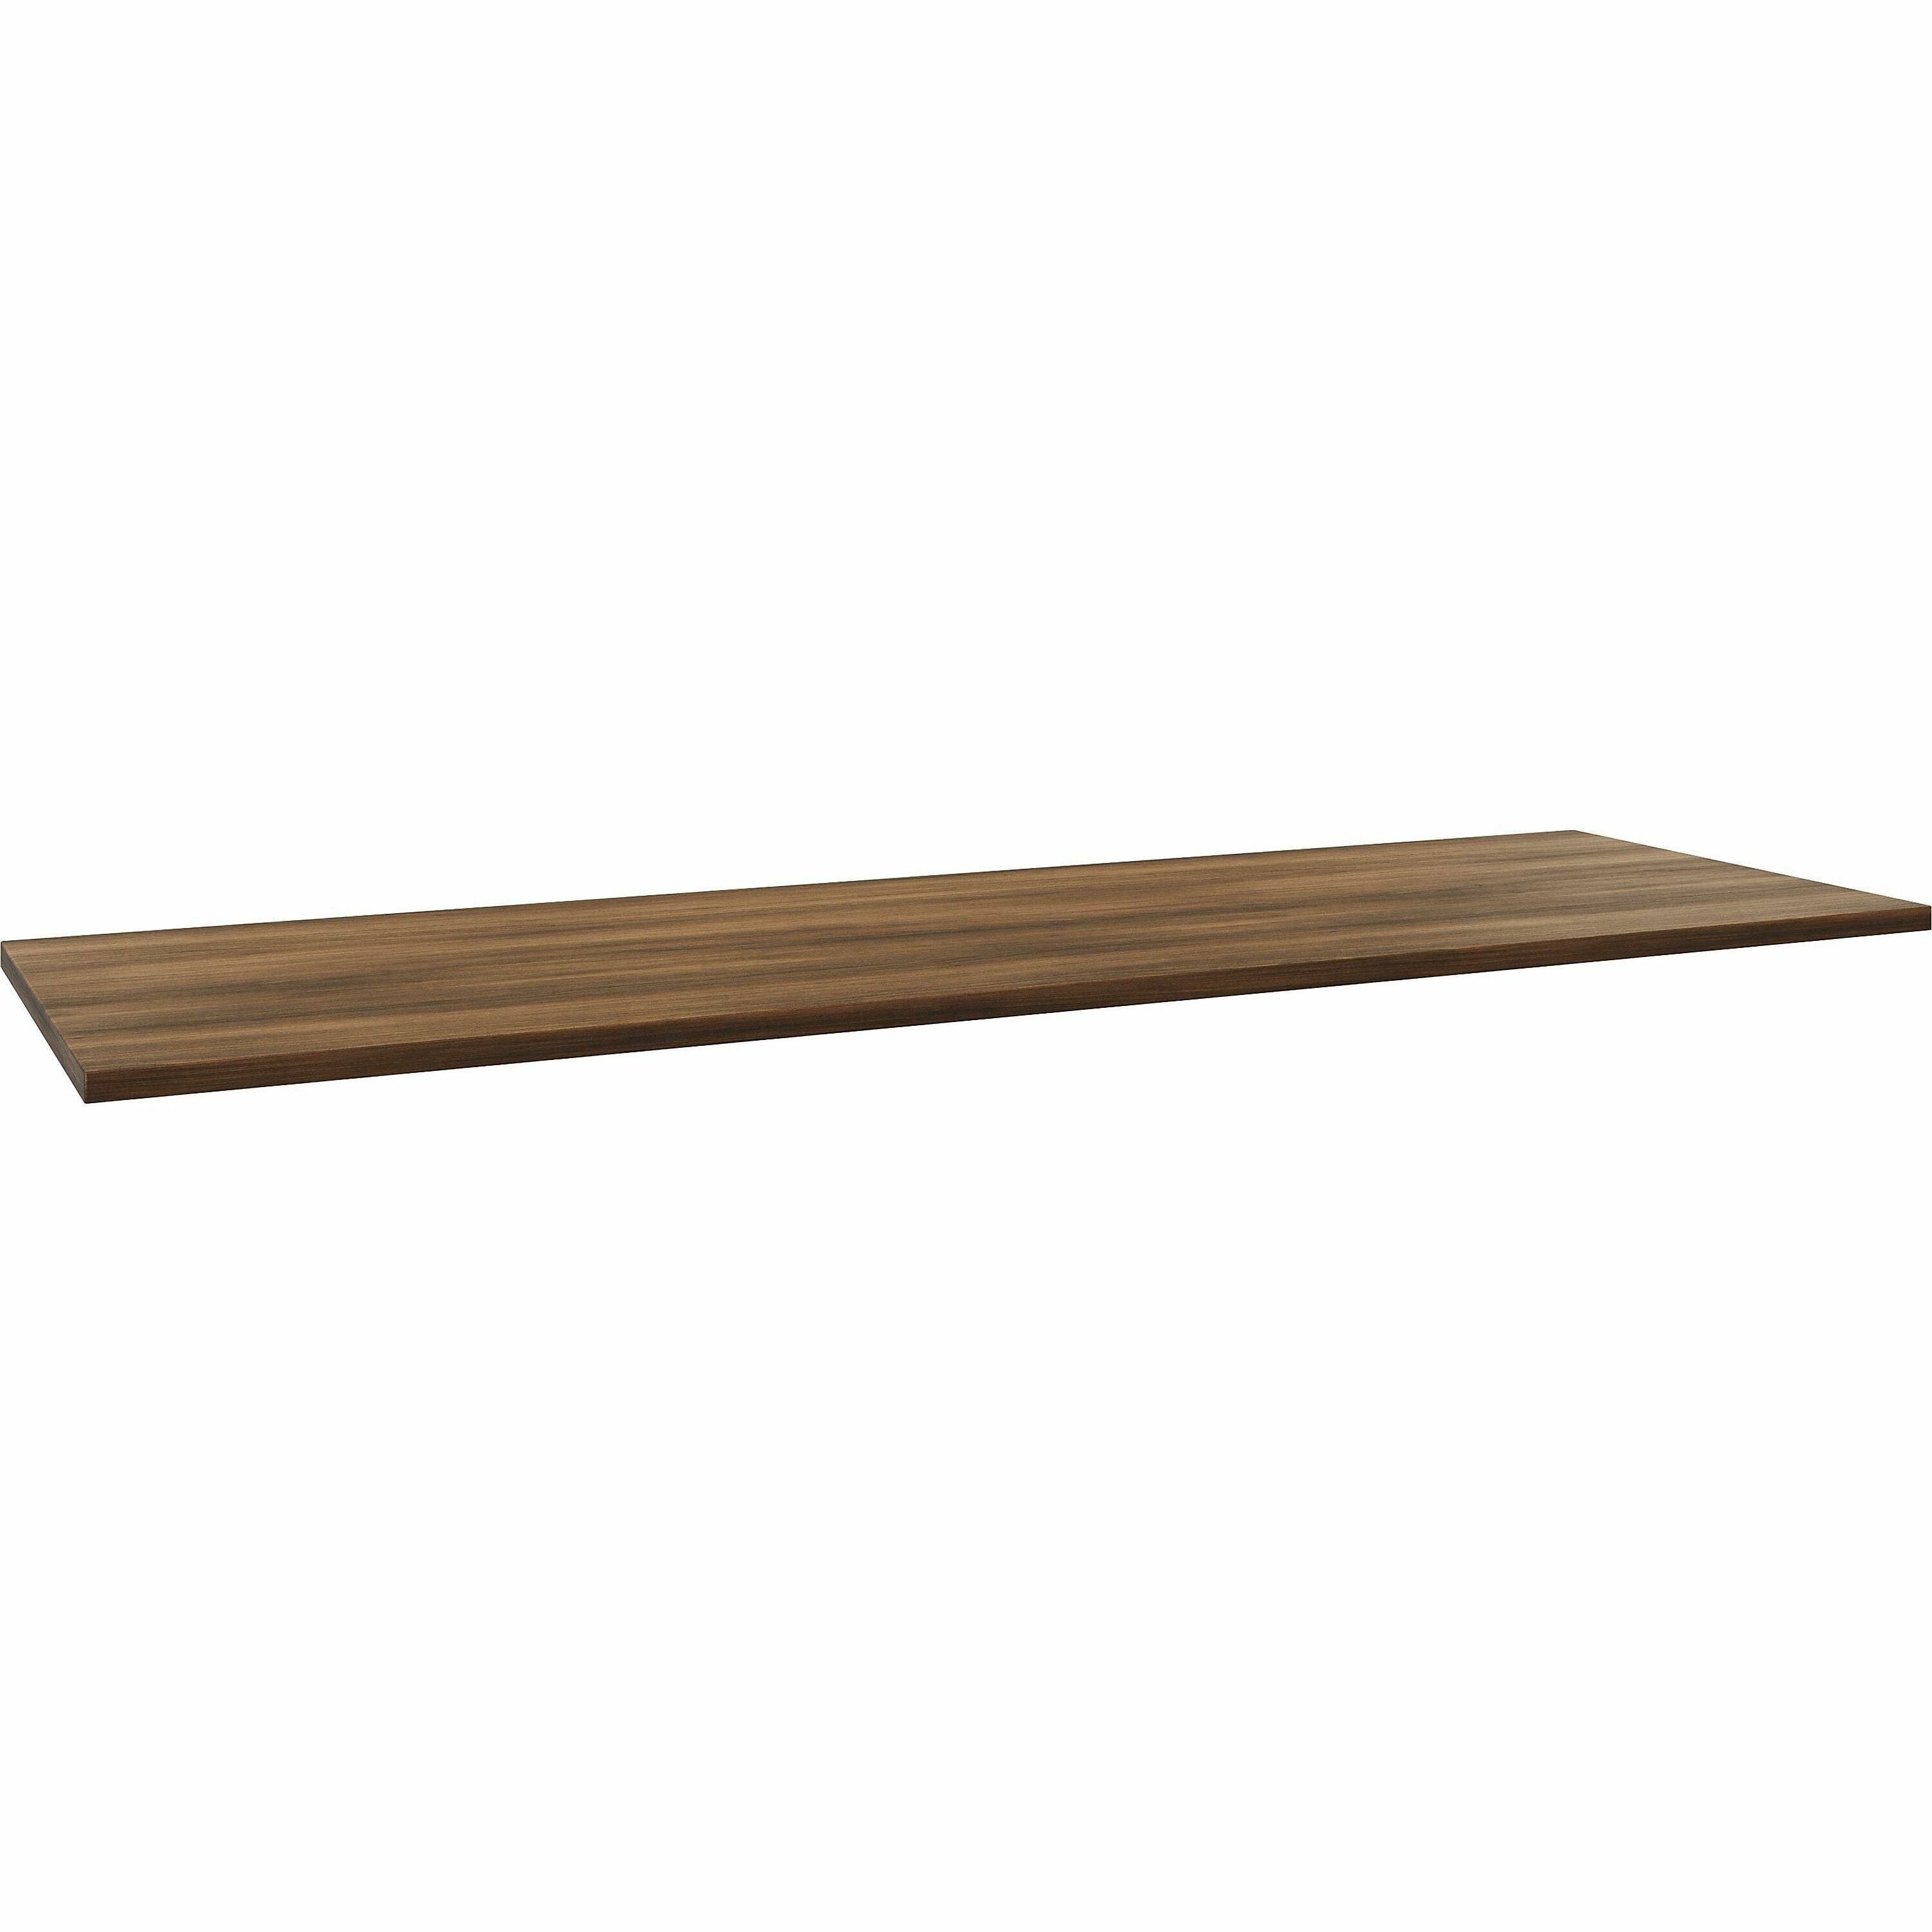 Special-T Low-Pressure Laminate Tabletop - For - Table TopLow Pressure Laminate (LPL) Rectangle Top - 24" Table Top Length x 72" Table Top Width x 1" Table Top Thickness - Assembly Required - Country Grove - 1 Each